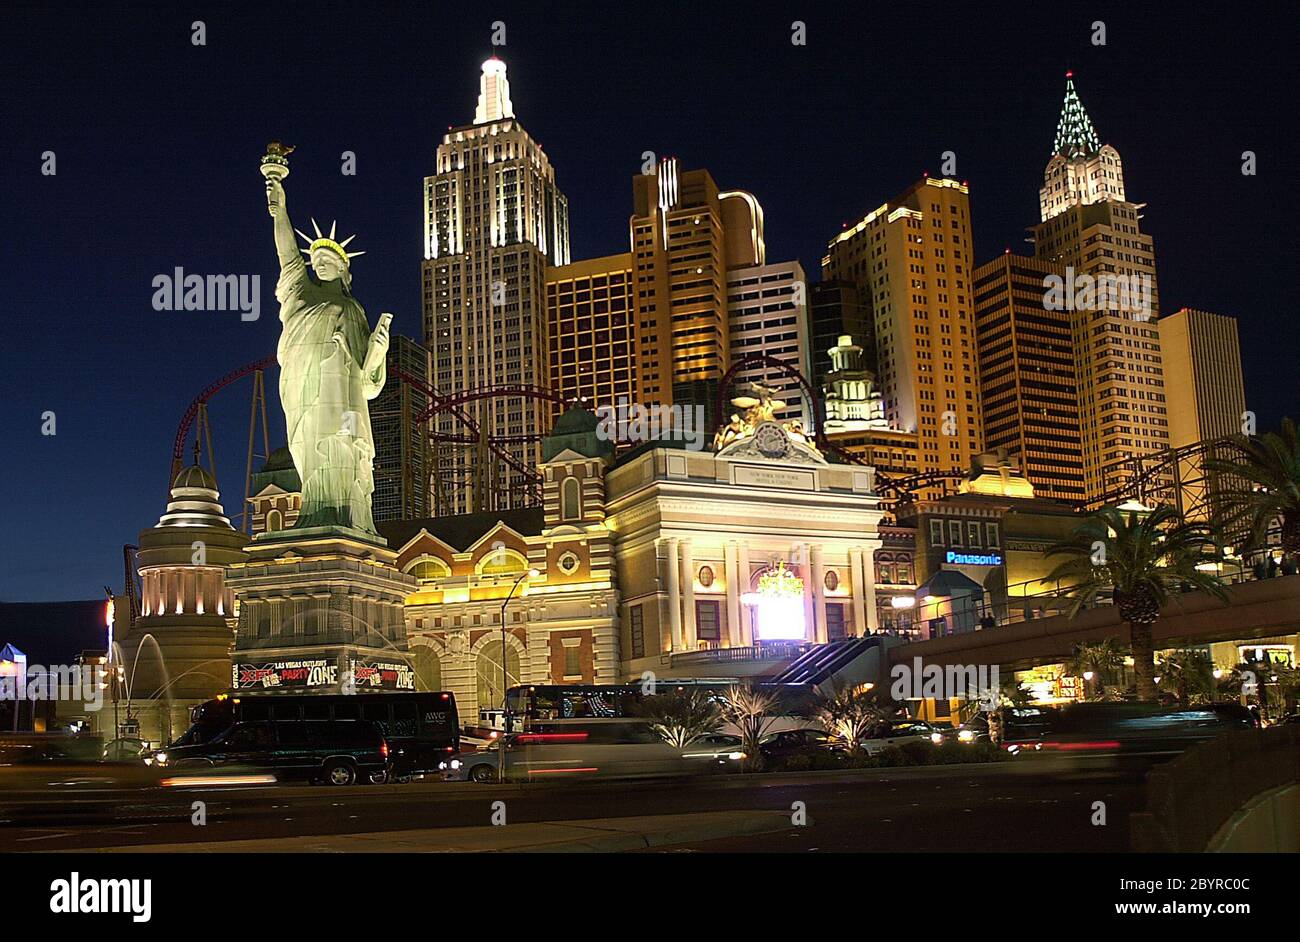 New York Hotel NYNY Hotel   Las Vegas 417  Hotel and most important places in Las Vegas The most beautiful place in Las Vegas Stock Photo